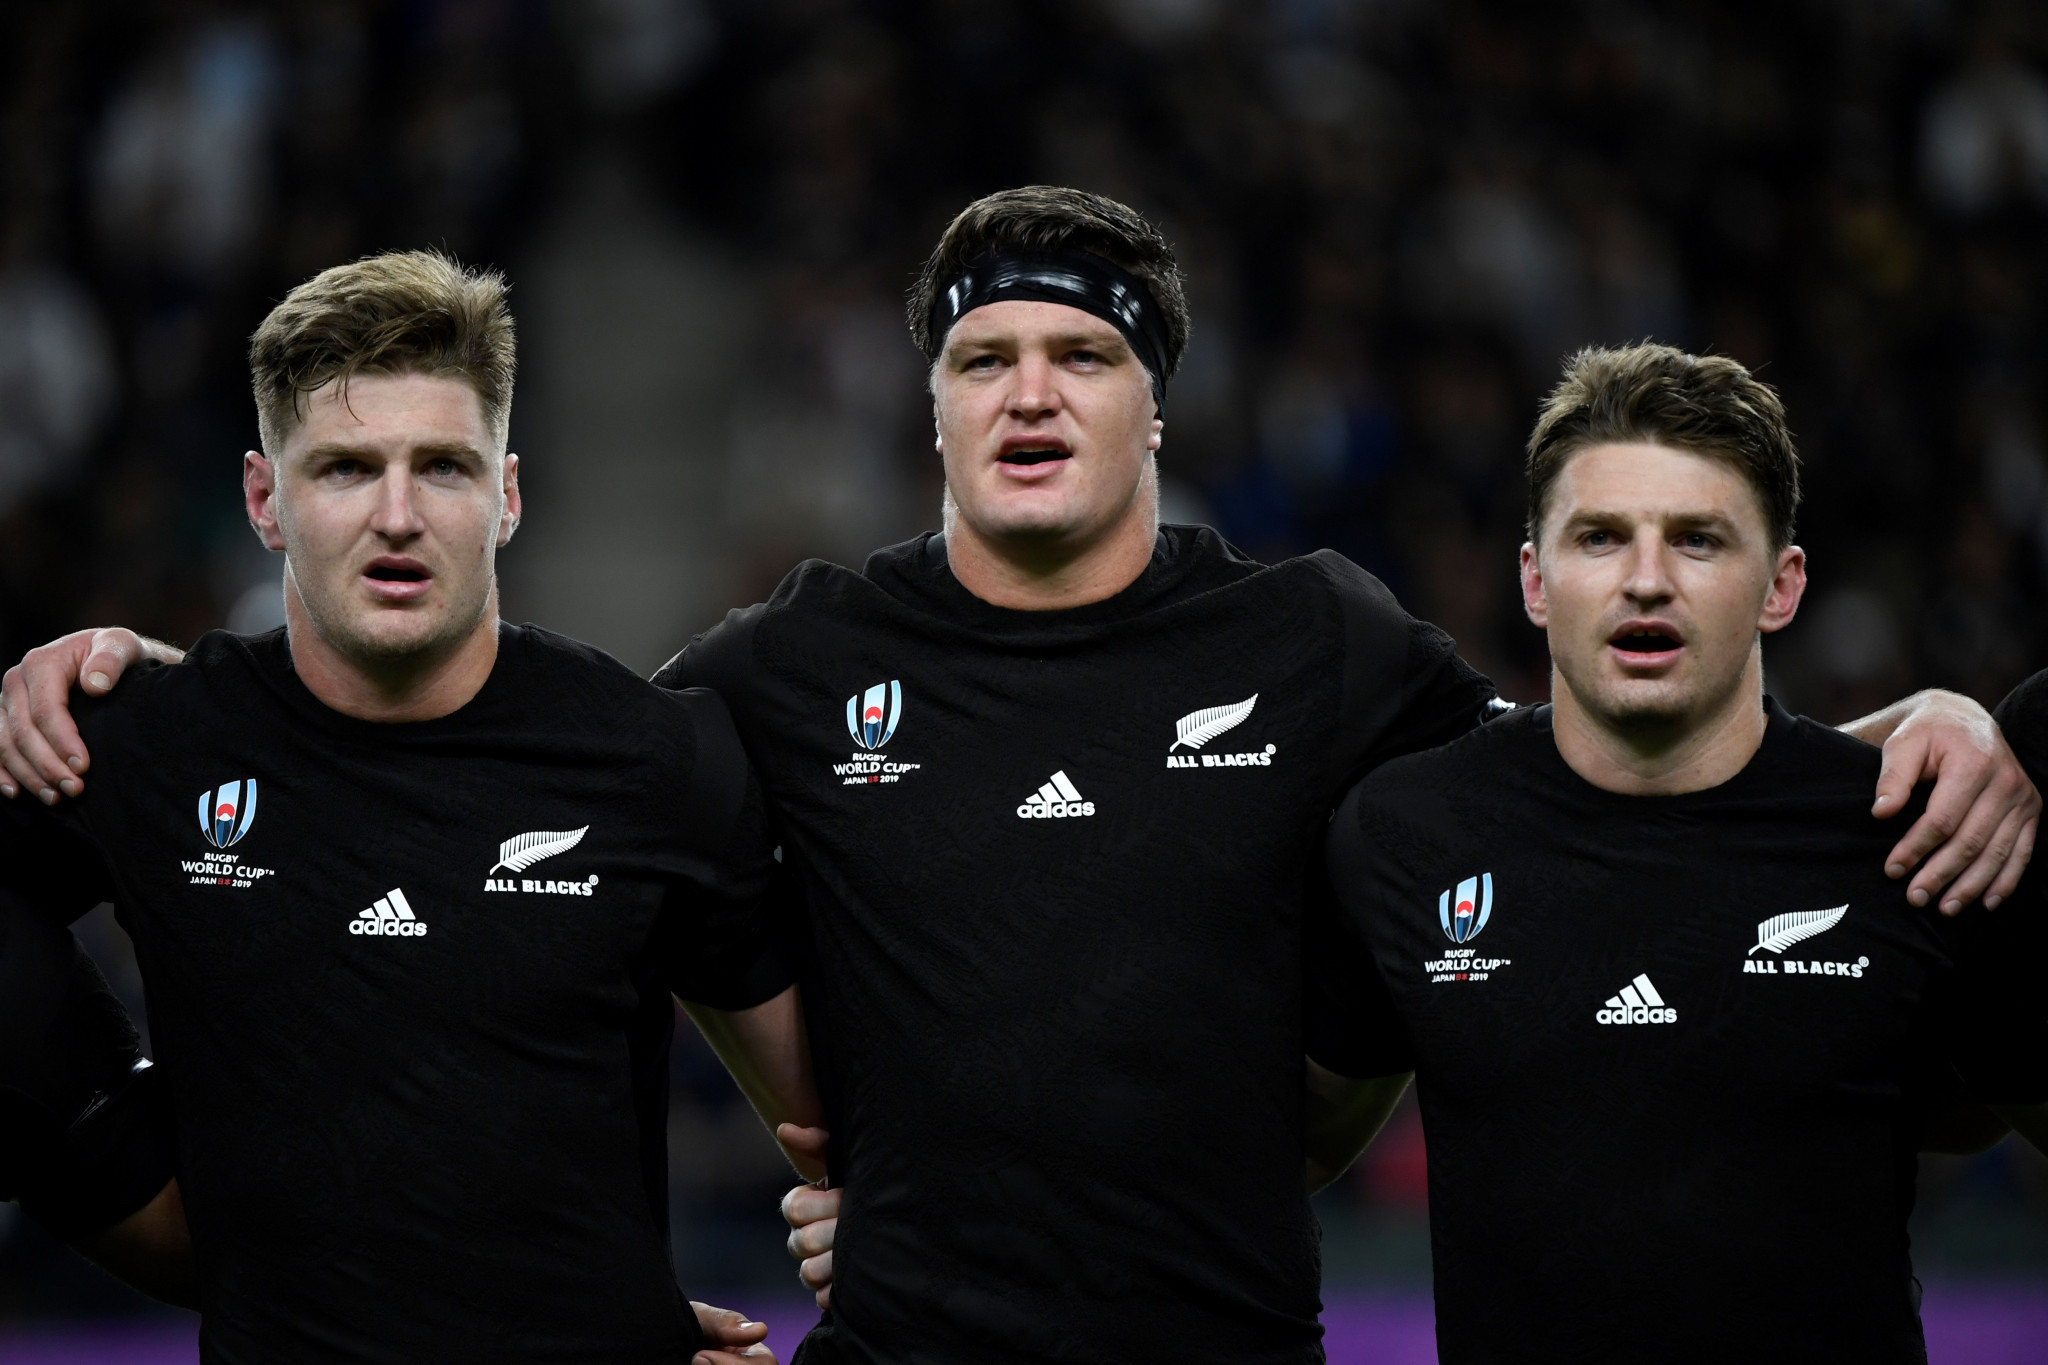 Canada crushed by awesome All Blacks